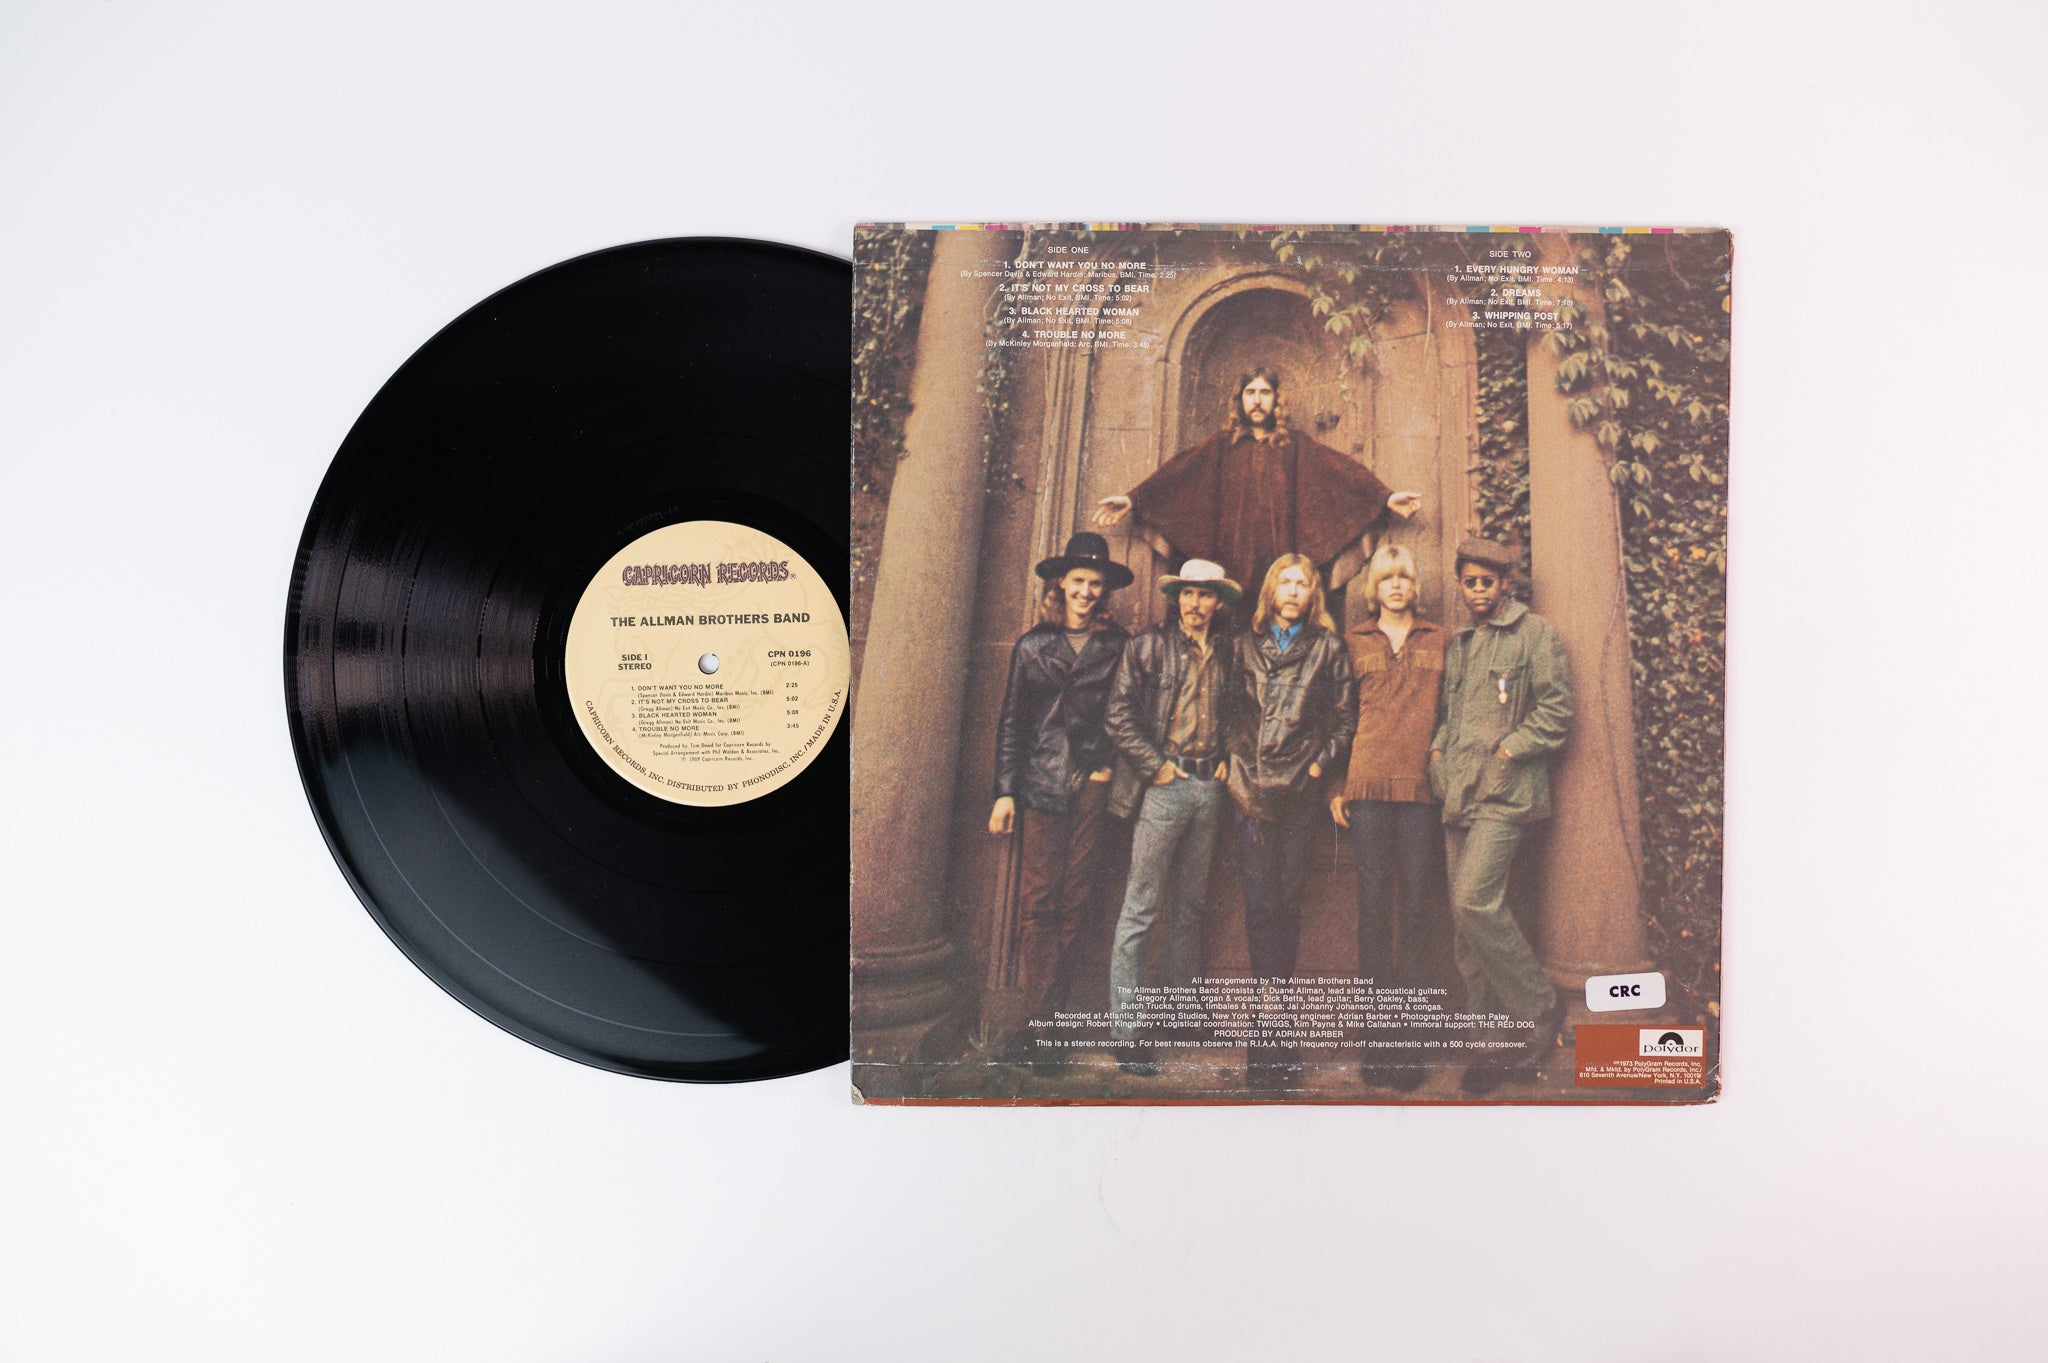 The Allman Brothers Band - The Allman Brothers Band on Polydor Record Club Reissue